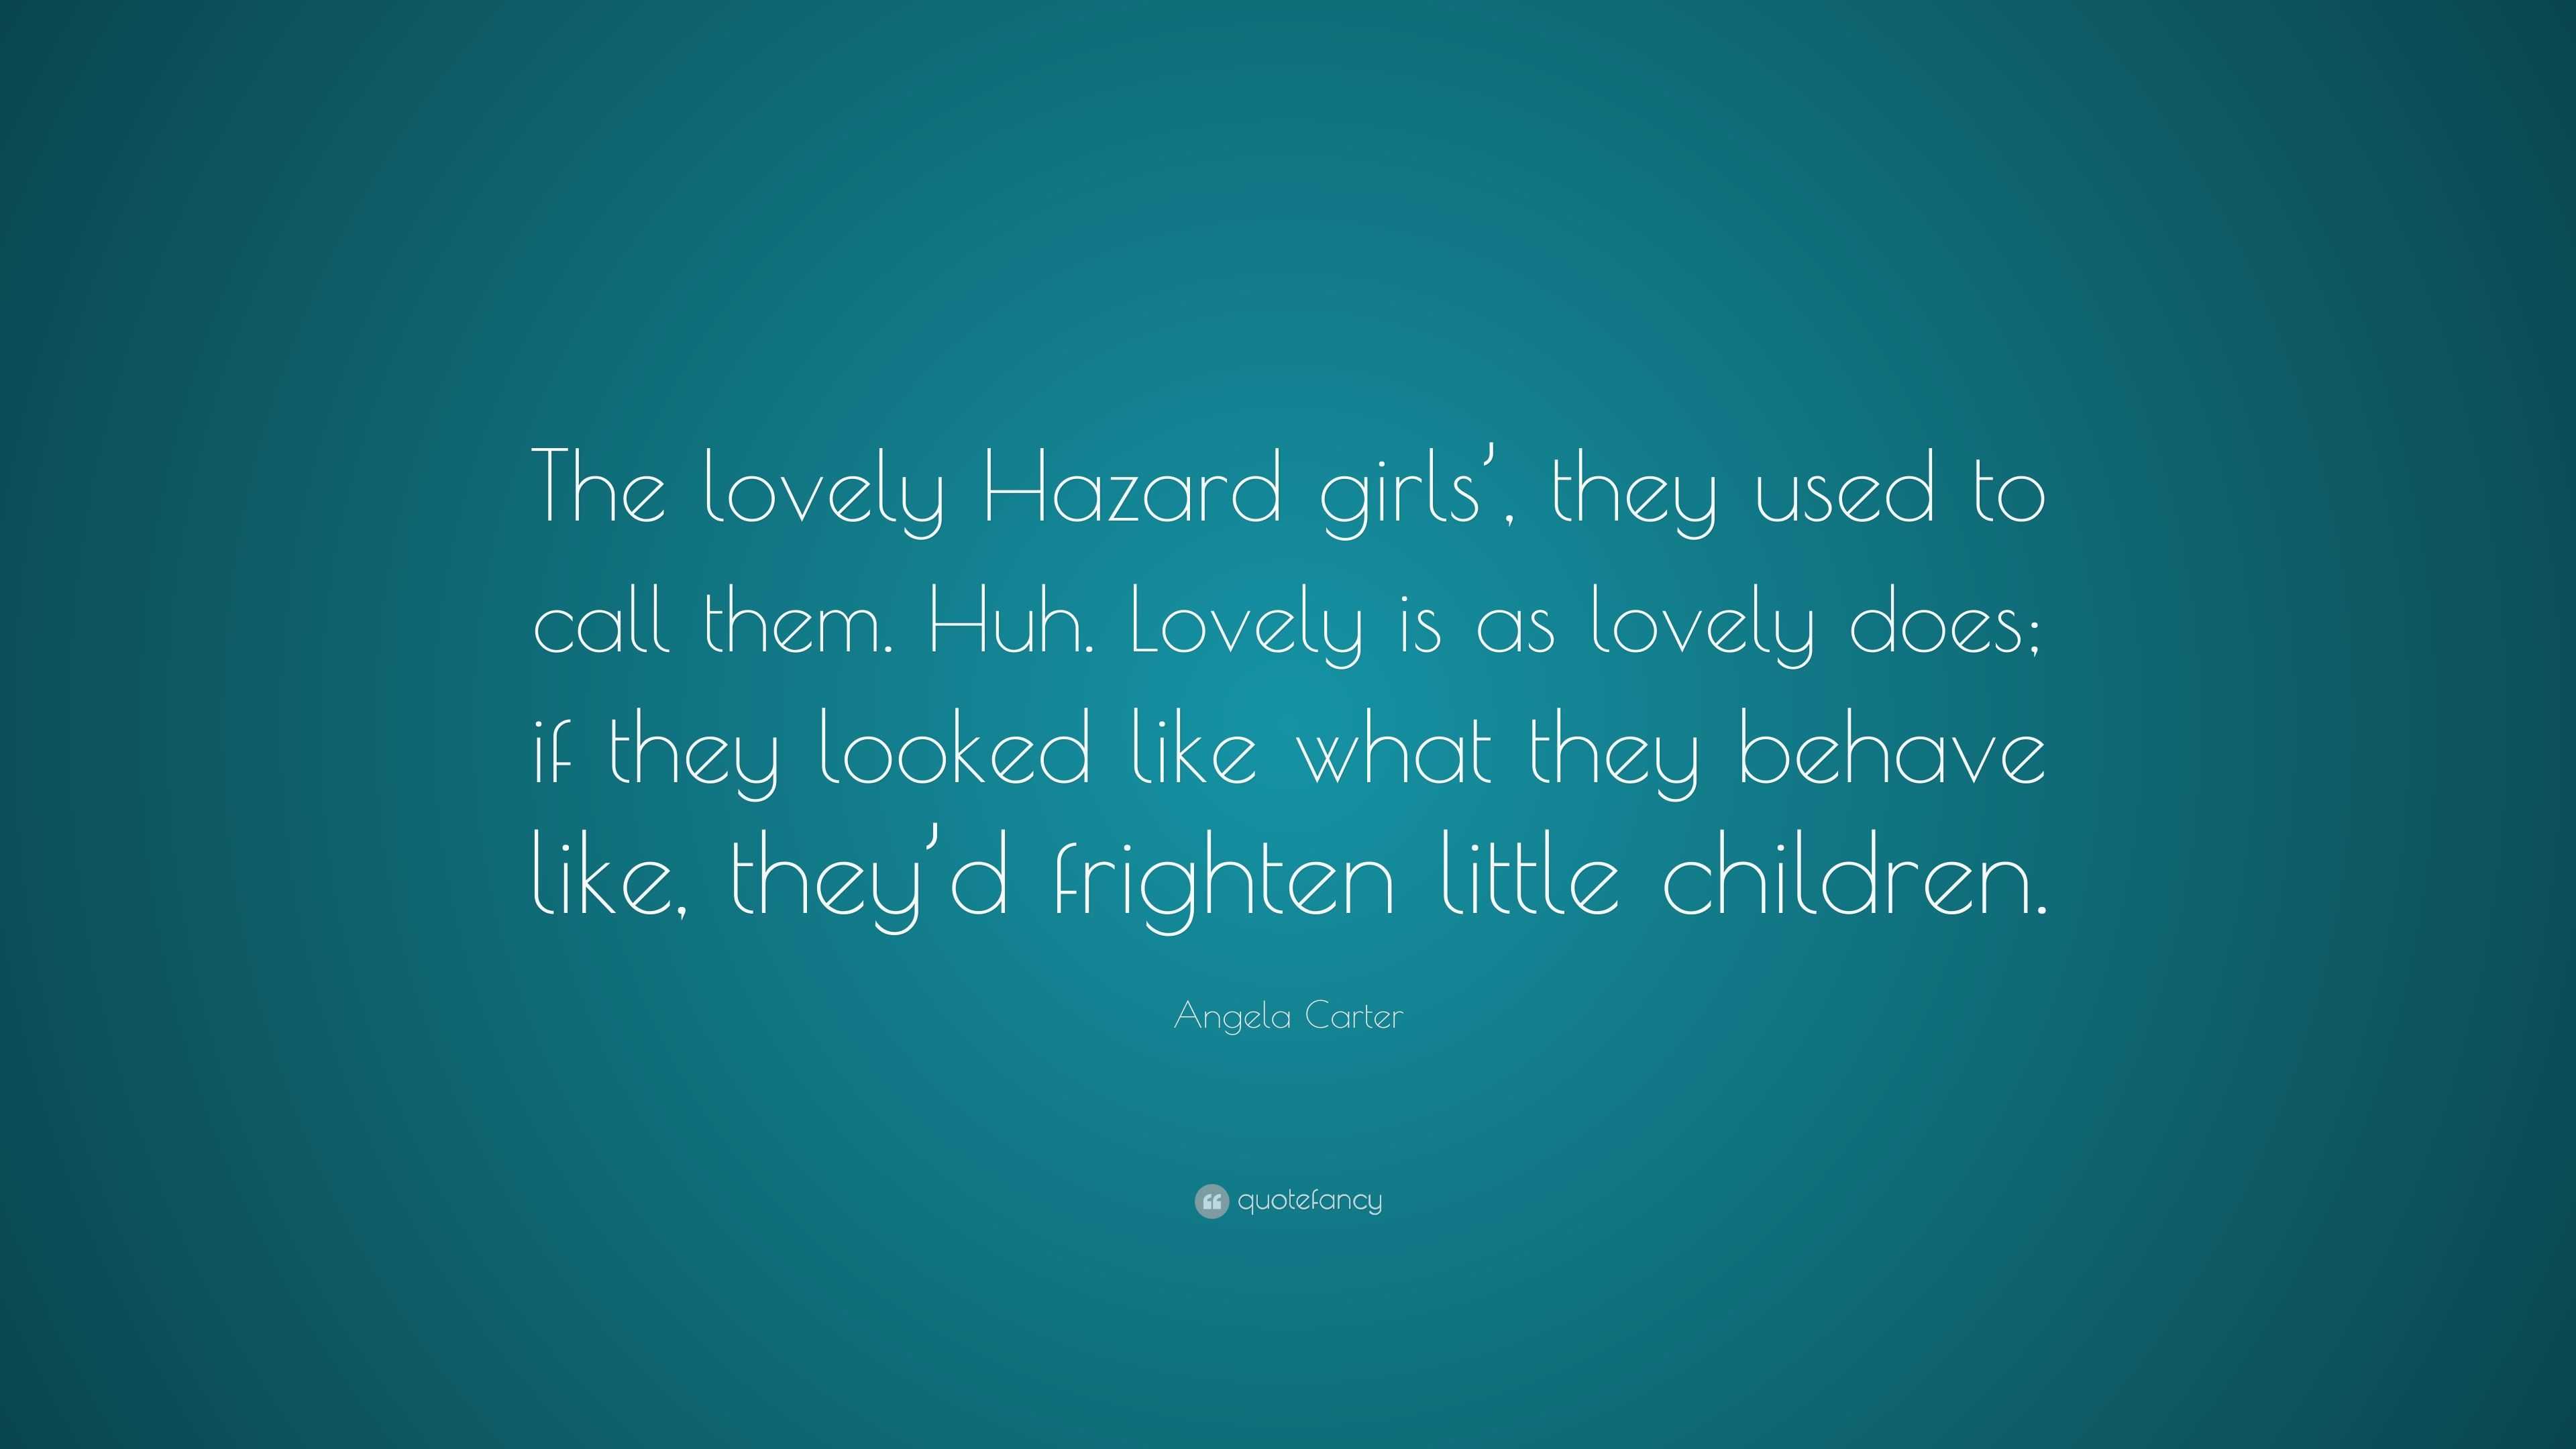 Angela Carter Quote: “The lovely Hazard girls’, they used to call them ...